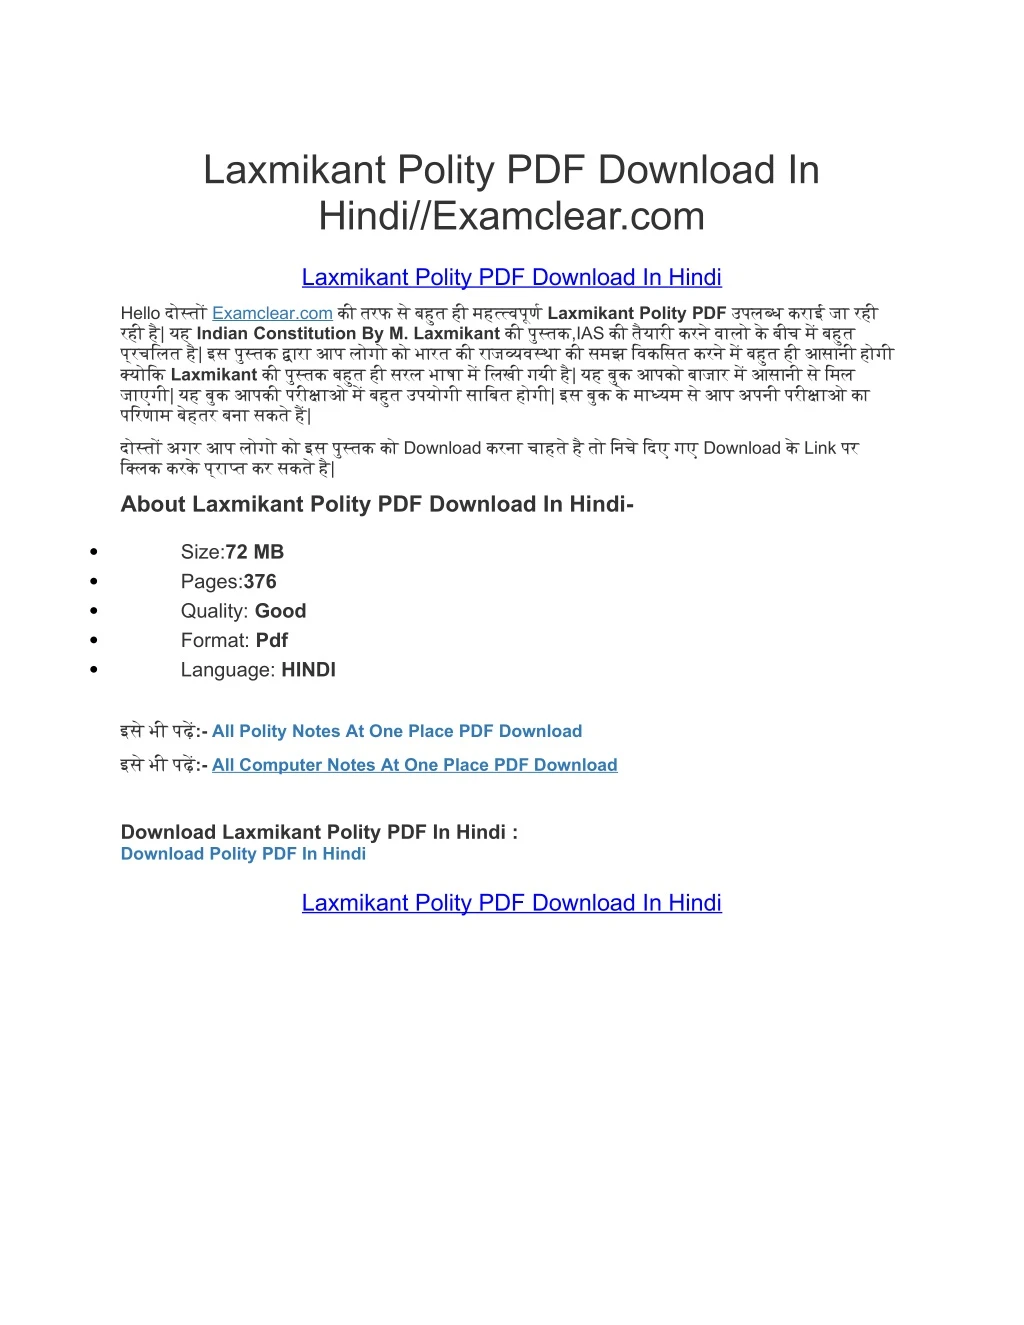 laxmikant polity pdf download in hindi examclear